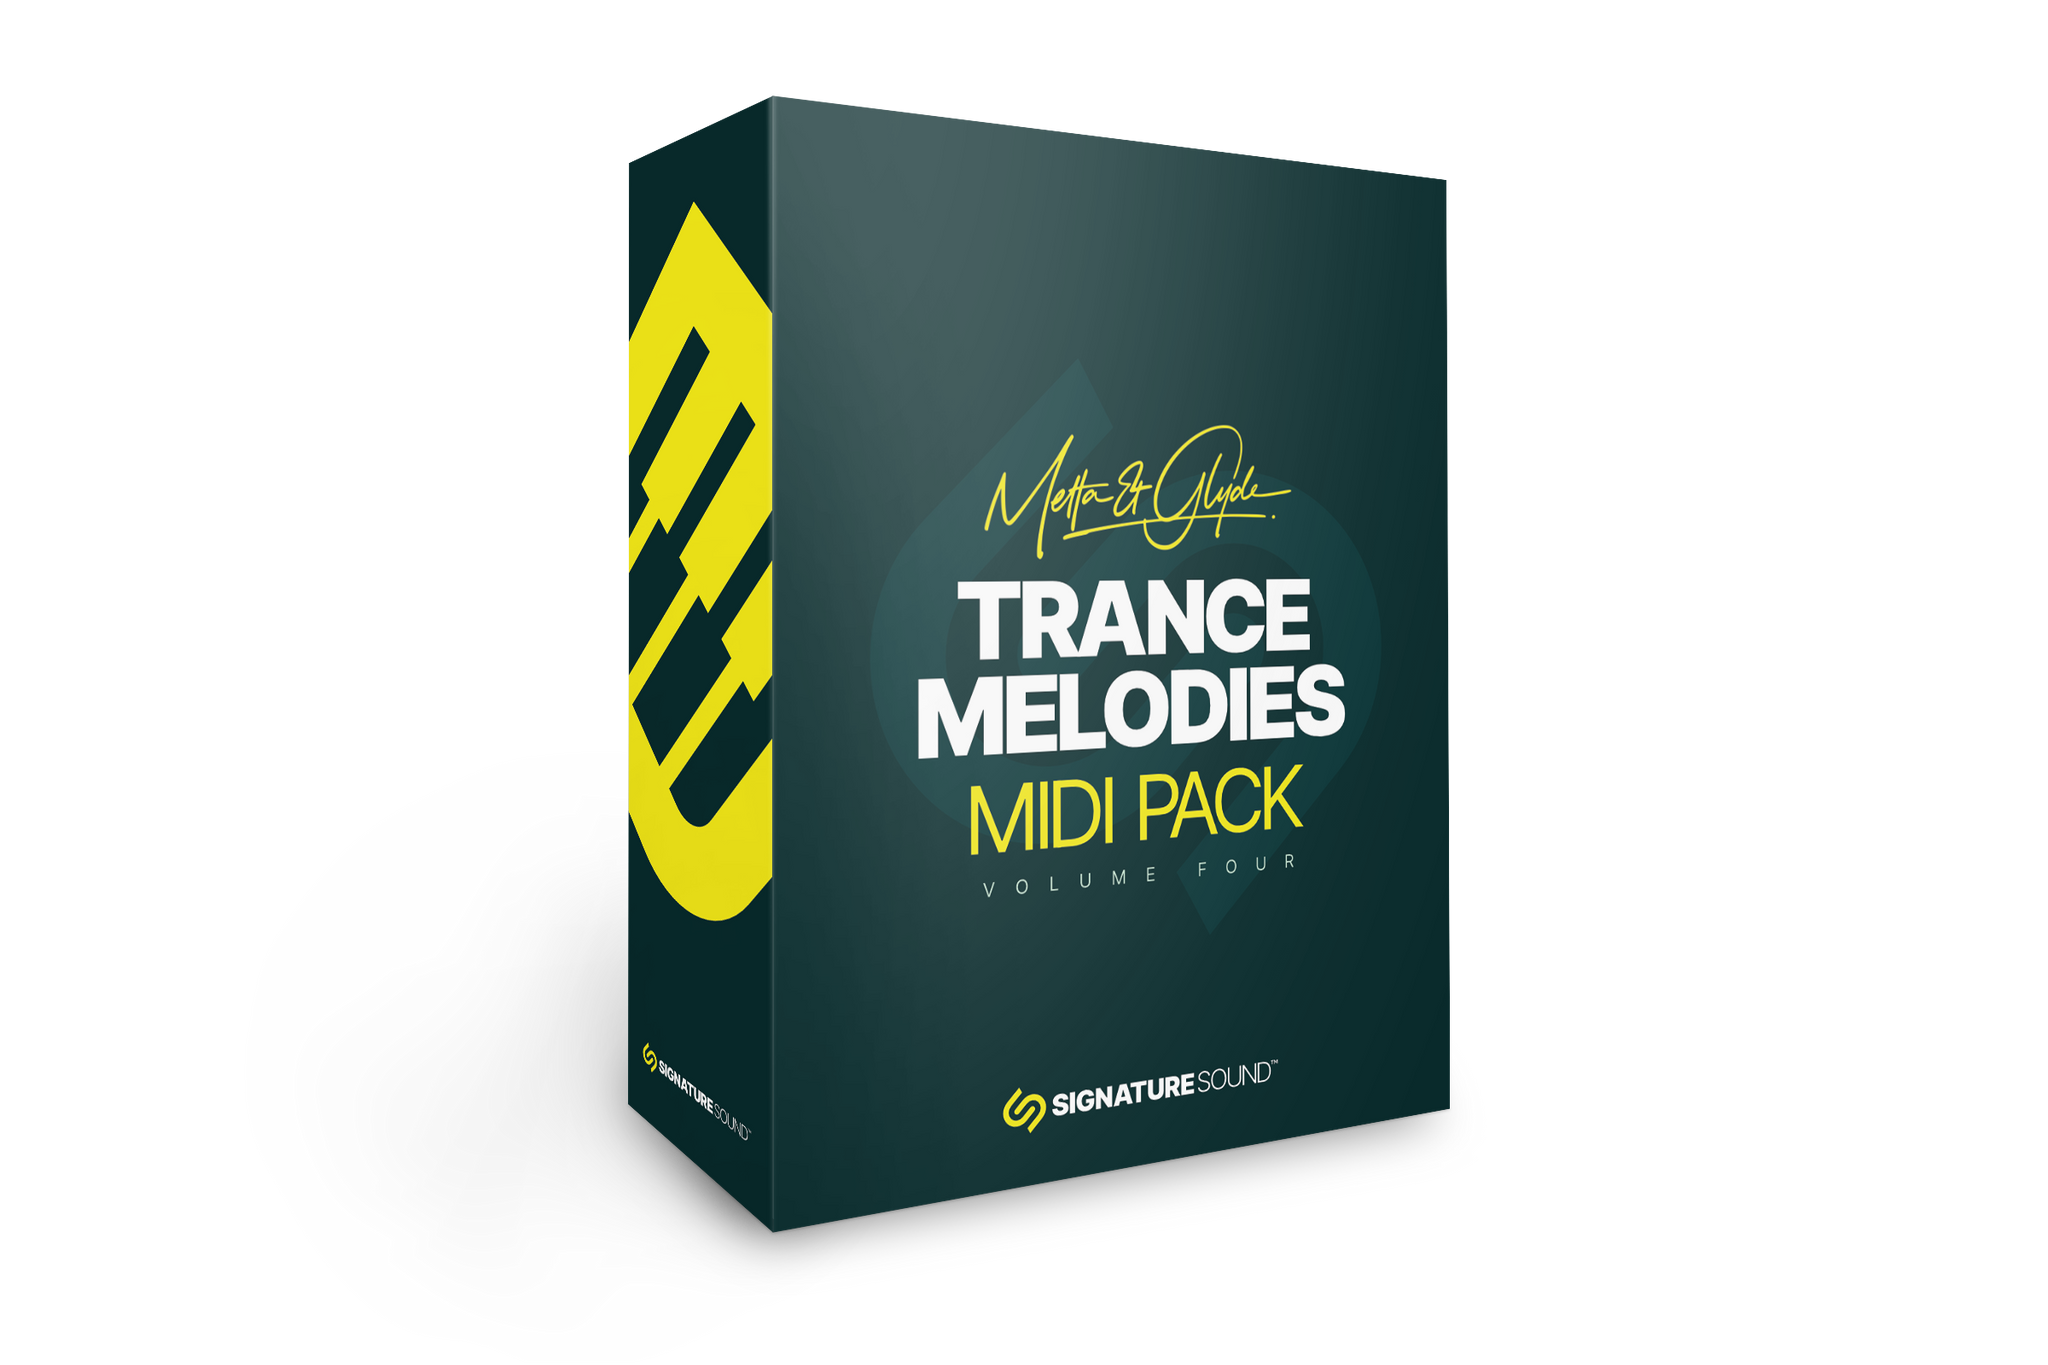 Metta and Glyde Trance Melodies [MIDI Pack] Volume Four